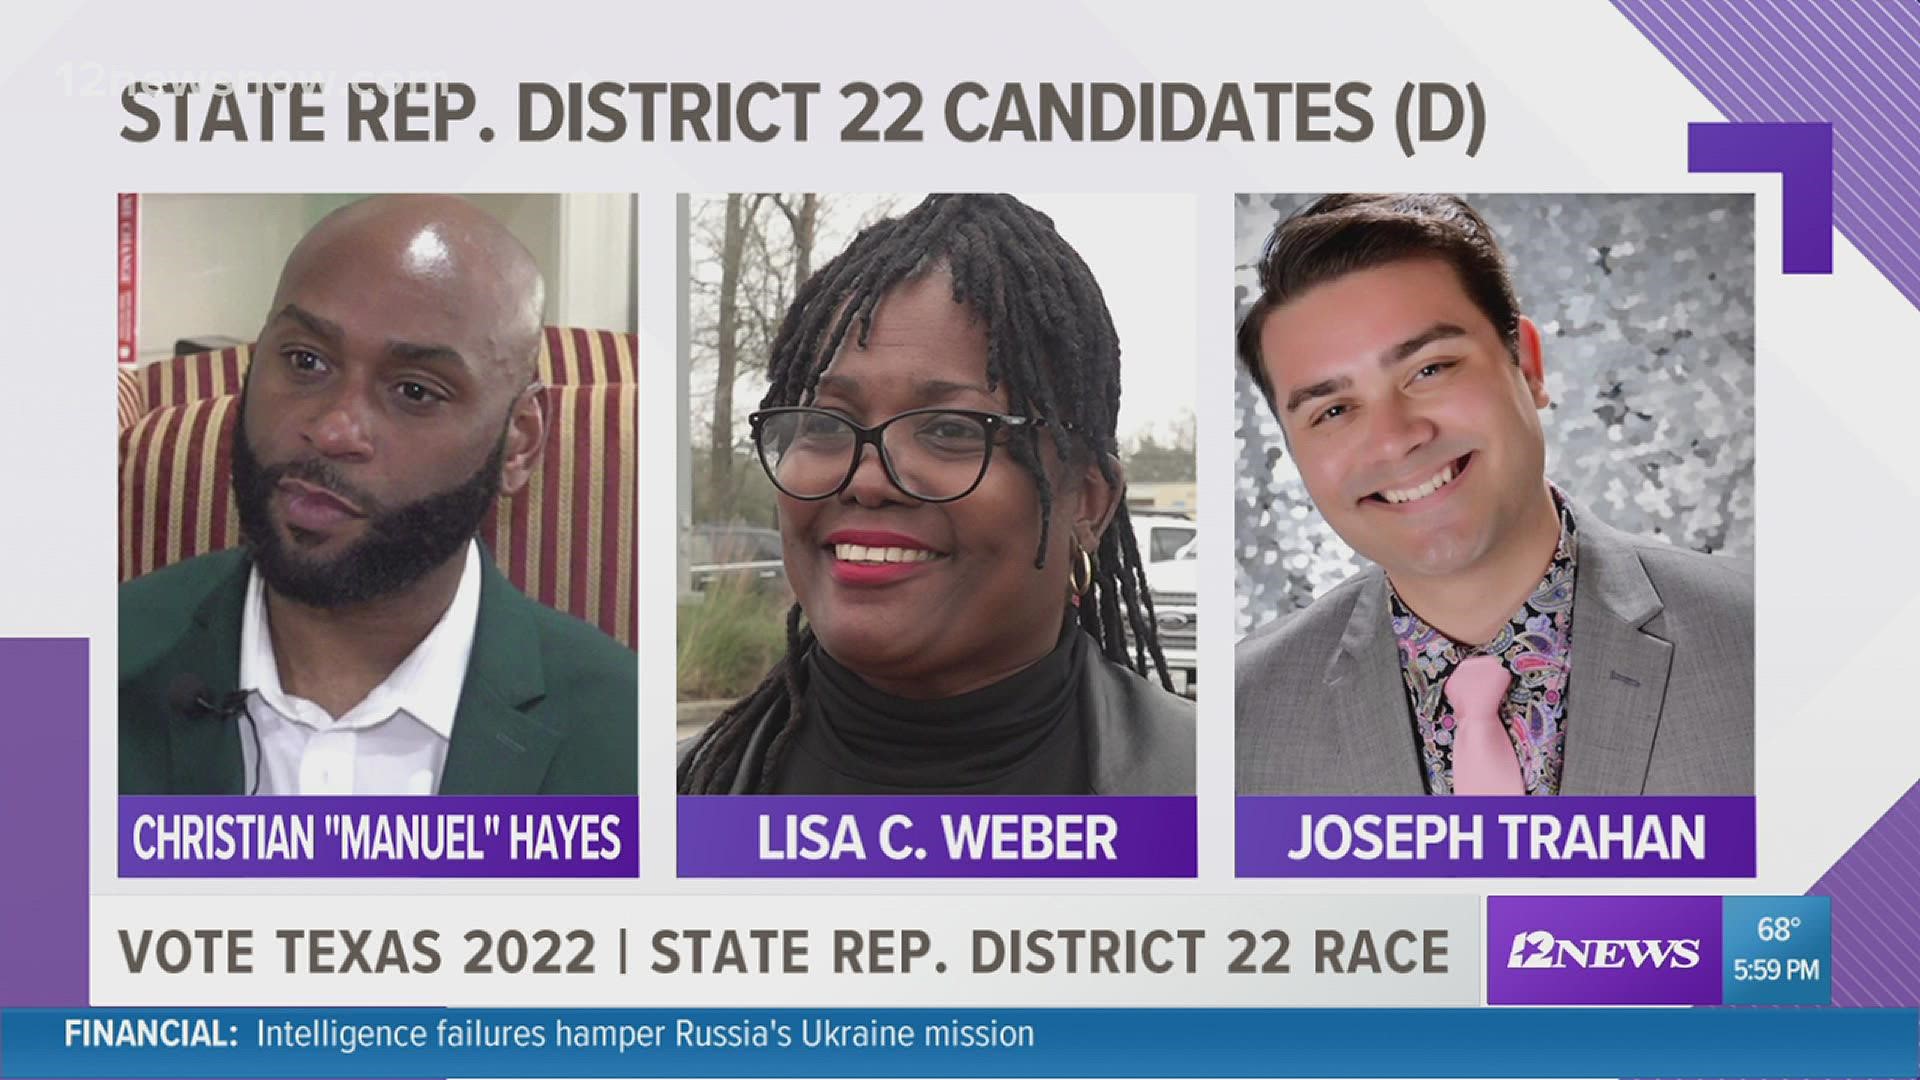 The Democratic candidate that wins will face Republican candidate Jacorion Randle in the general elections.